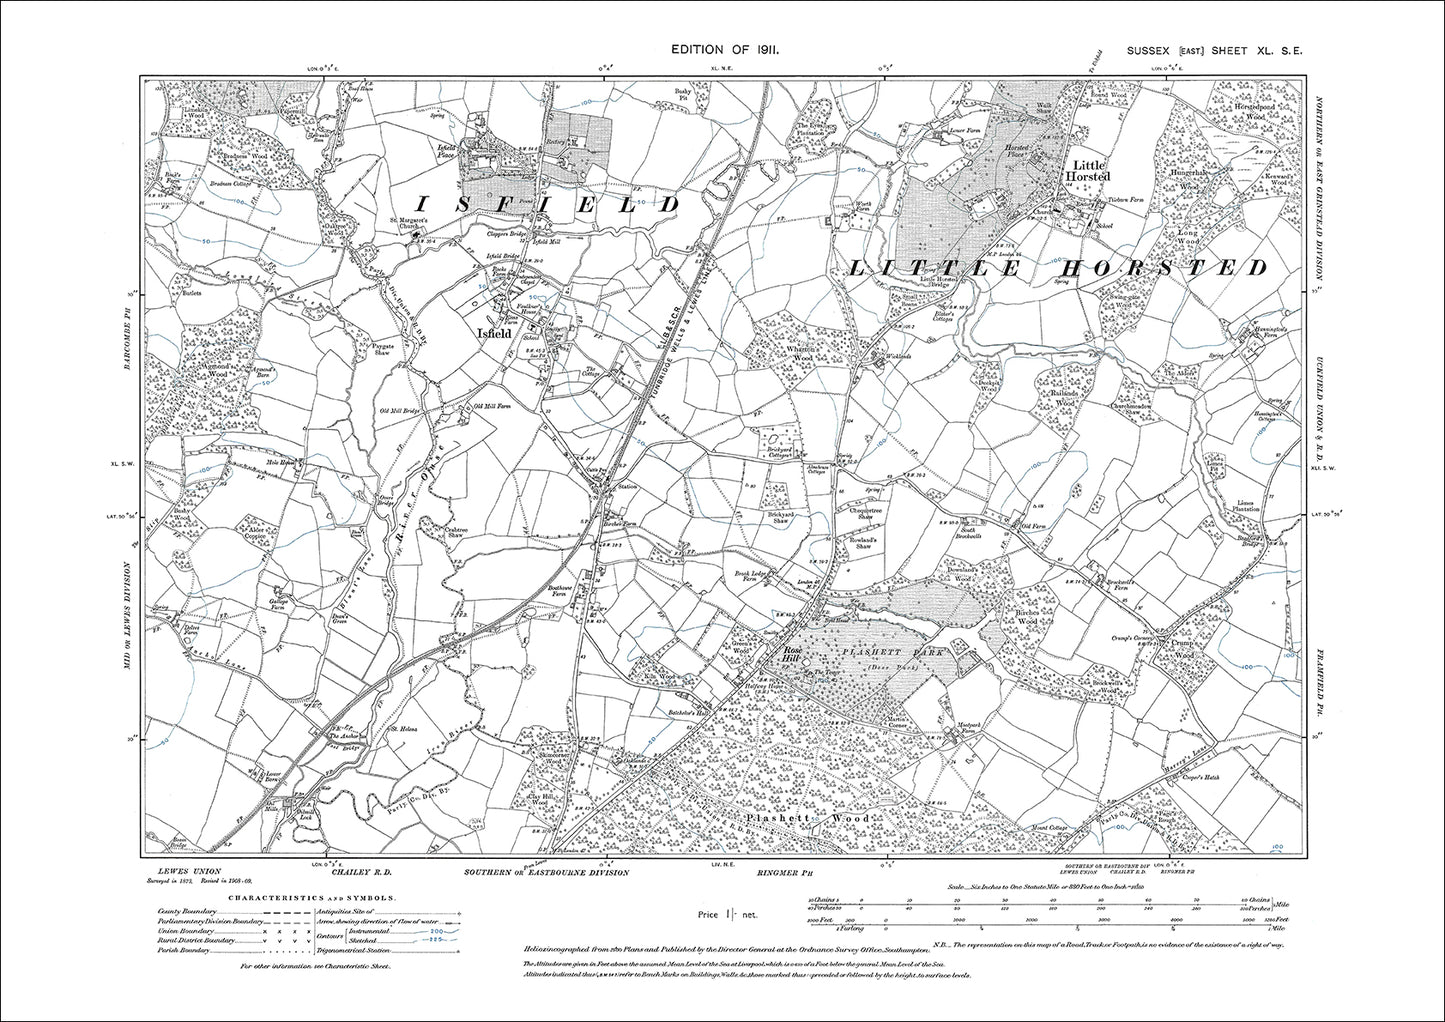 Isfield, Little Horsted, Rose Hill, old map Sussex 1911: 40SE